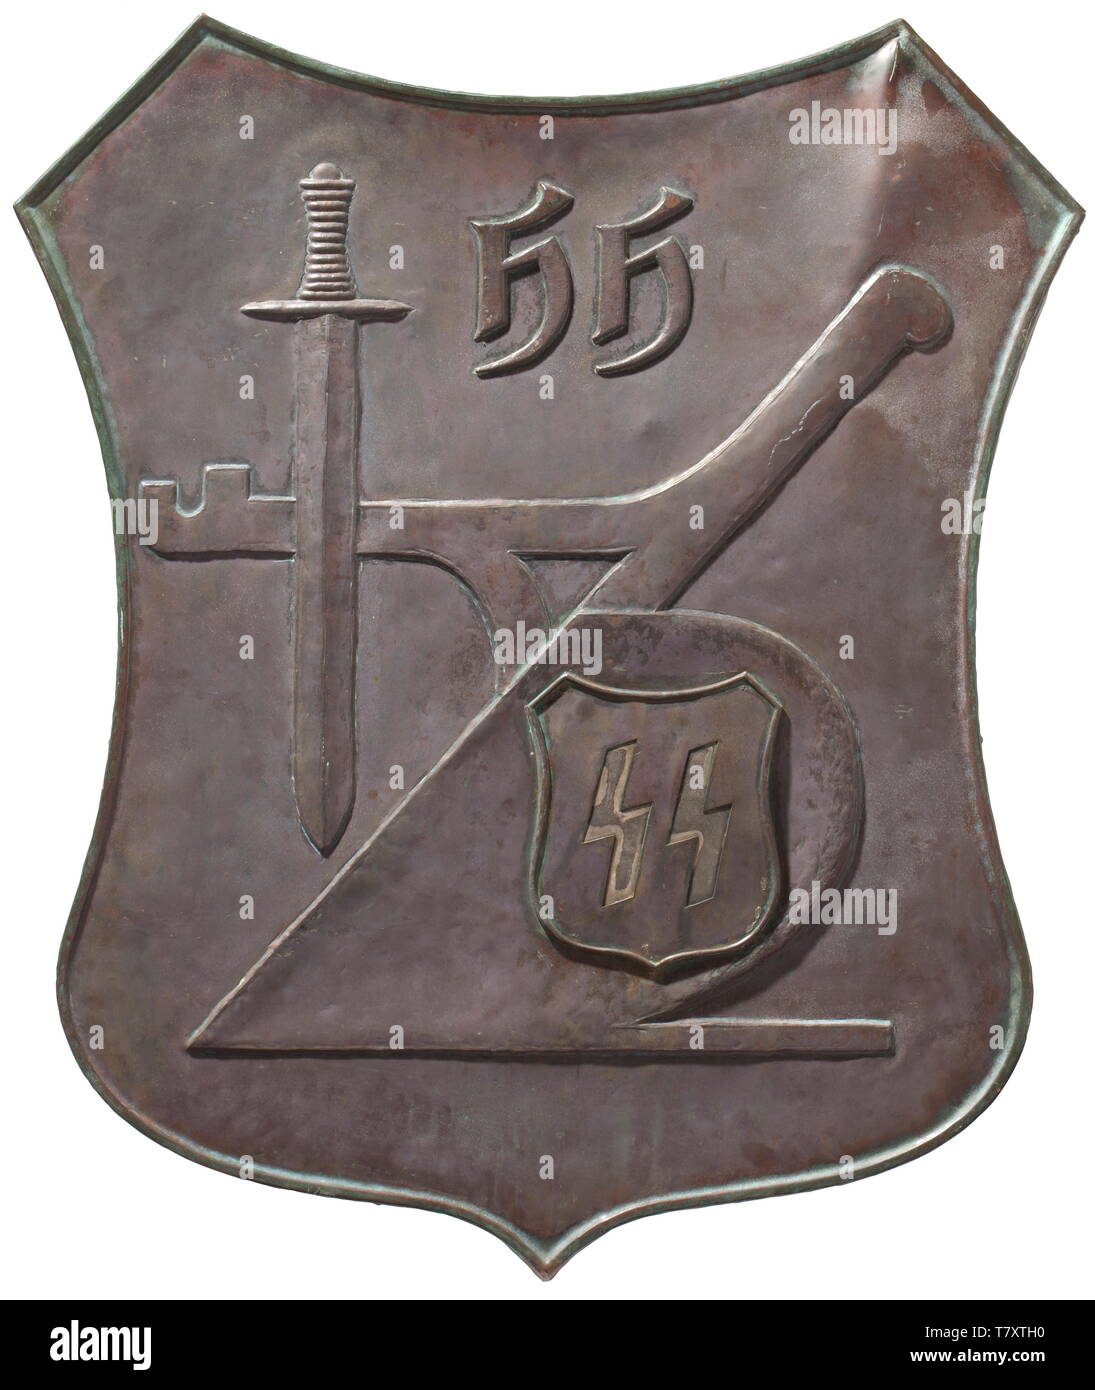 Heinrich Himmler - a farmstead shield 'Wehrbauer', Large sheet bronze escutcheon with depictions in relief of a ploughshare, a sword, SS runes and Himmler's initials 'HH', the reverse with braces and vestiges of cement. 87 x 96 cm. 'Wehrbauer' originally referred to farmers who lived in border areas so as to be able to defend them if needed. Himmler sought to revitalise this concept to unite it with his 'blood and soil' ideology and thus to literally build a 'human wall' around the borders of the German Reich. As a priority meritorious SS soldiers would be granted estates i, Editorial-Use-Only Stock Photo